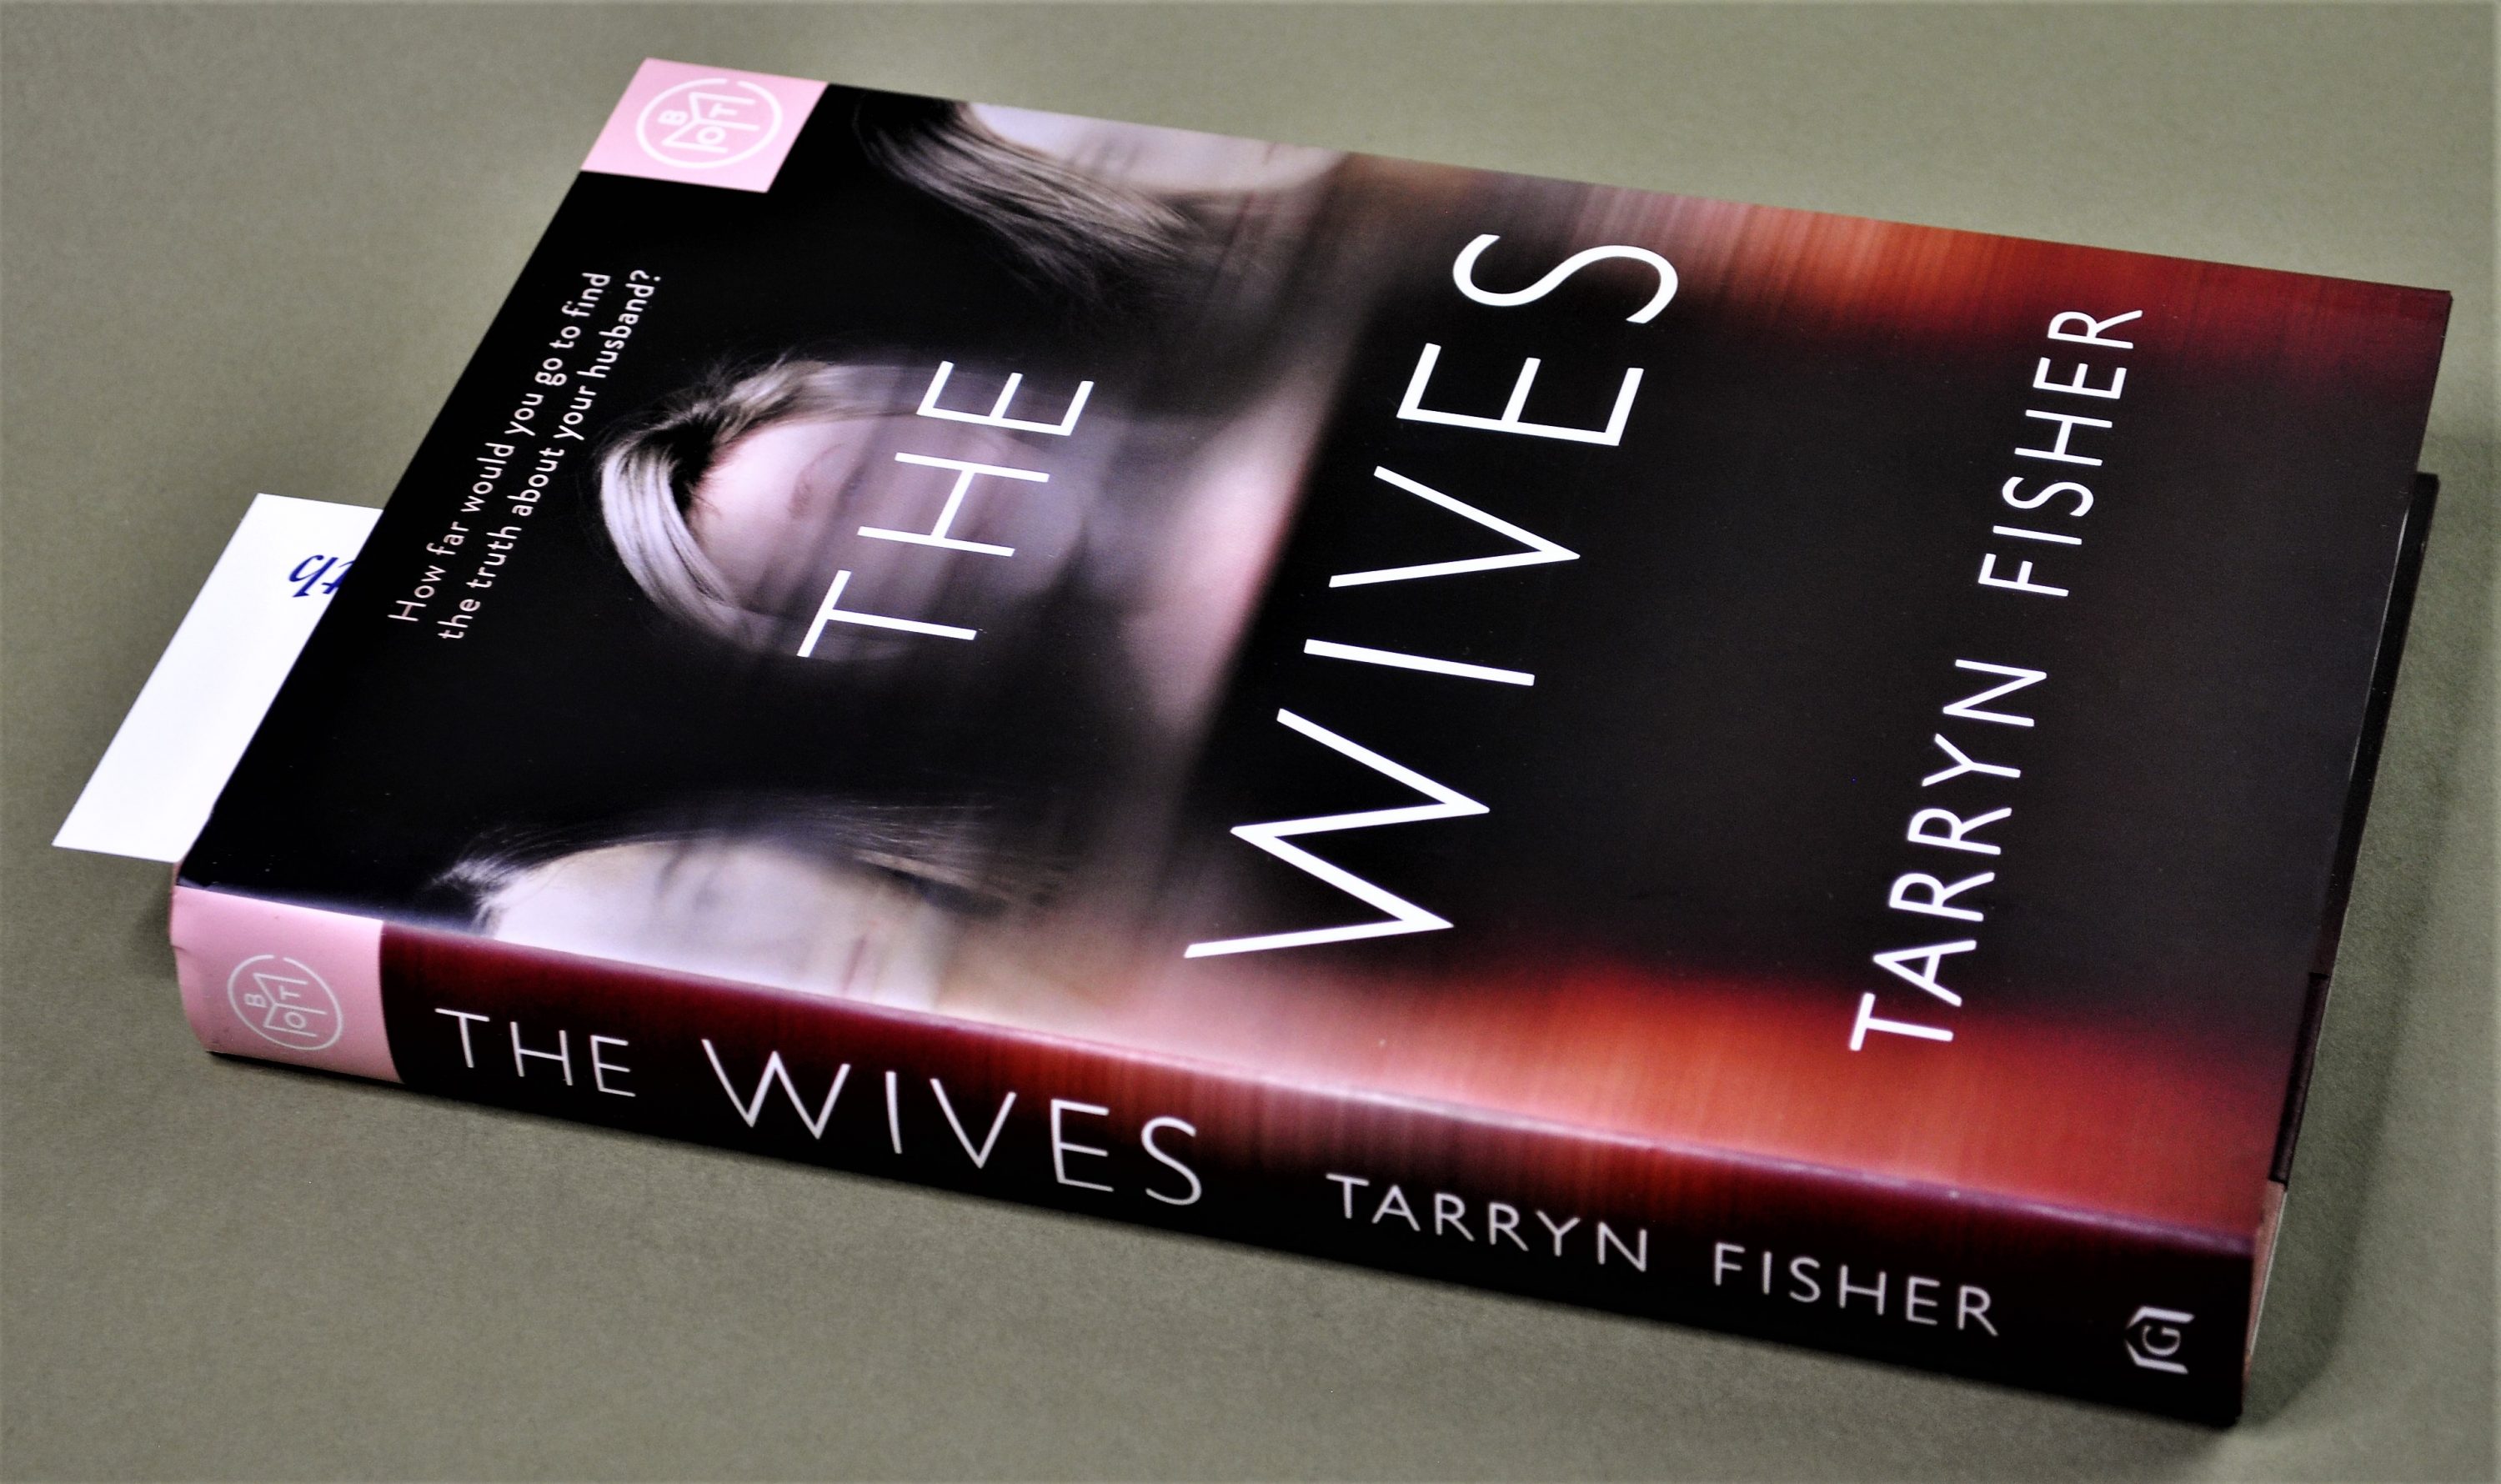 The Wives, Tarryn Fisher, Book of the Month Review